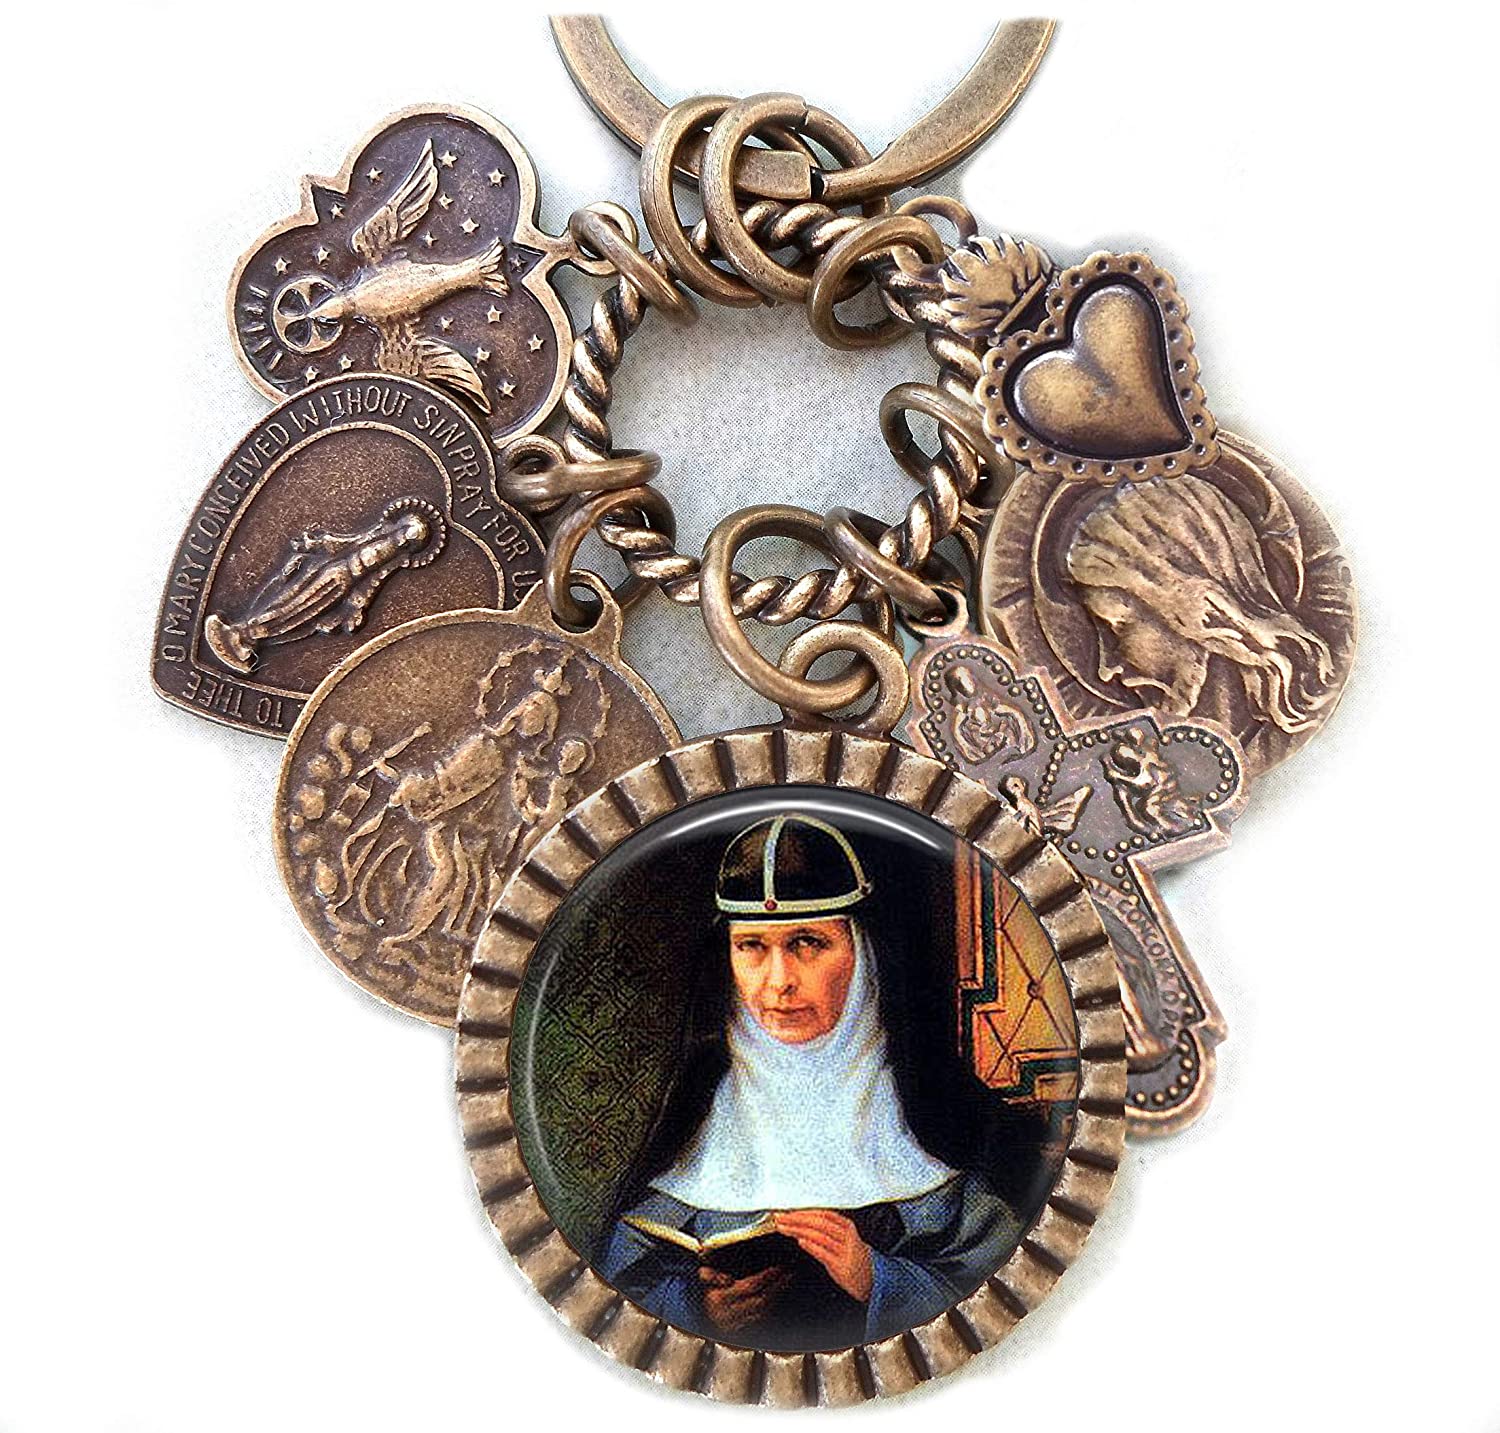 St. Bridget of Sweden Keychain, Necklace or Purse Clip, Patron Saint Catholic Jewelry, Confirmation Gift